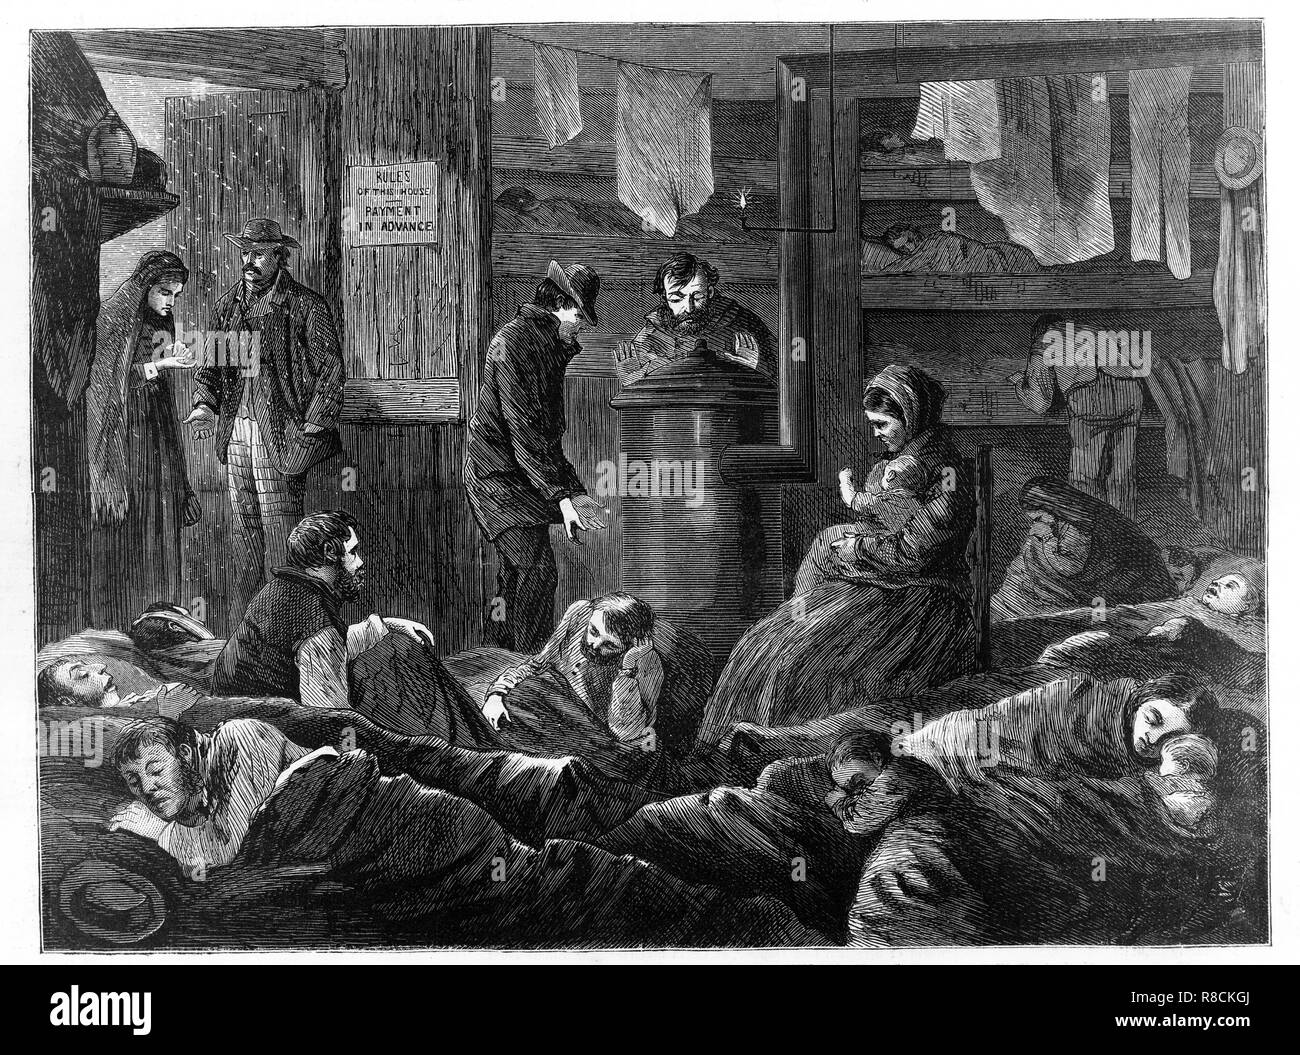 Underground Lodgings for the Poor, Greenwich Street, New York, from Harper's Weekly, pub. 1869. Creator: Paul Frenzeny (1840-1902). Stock Photo